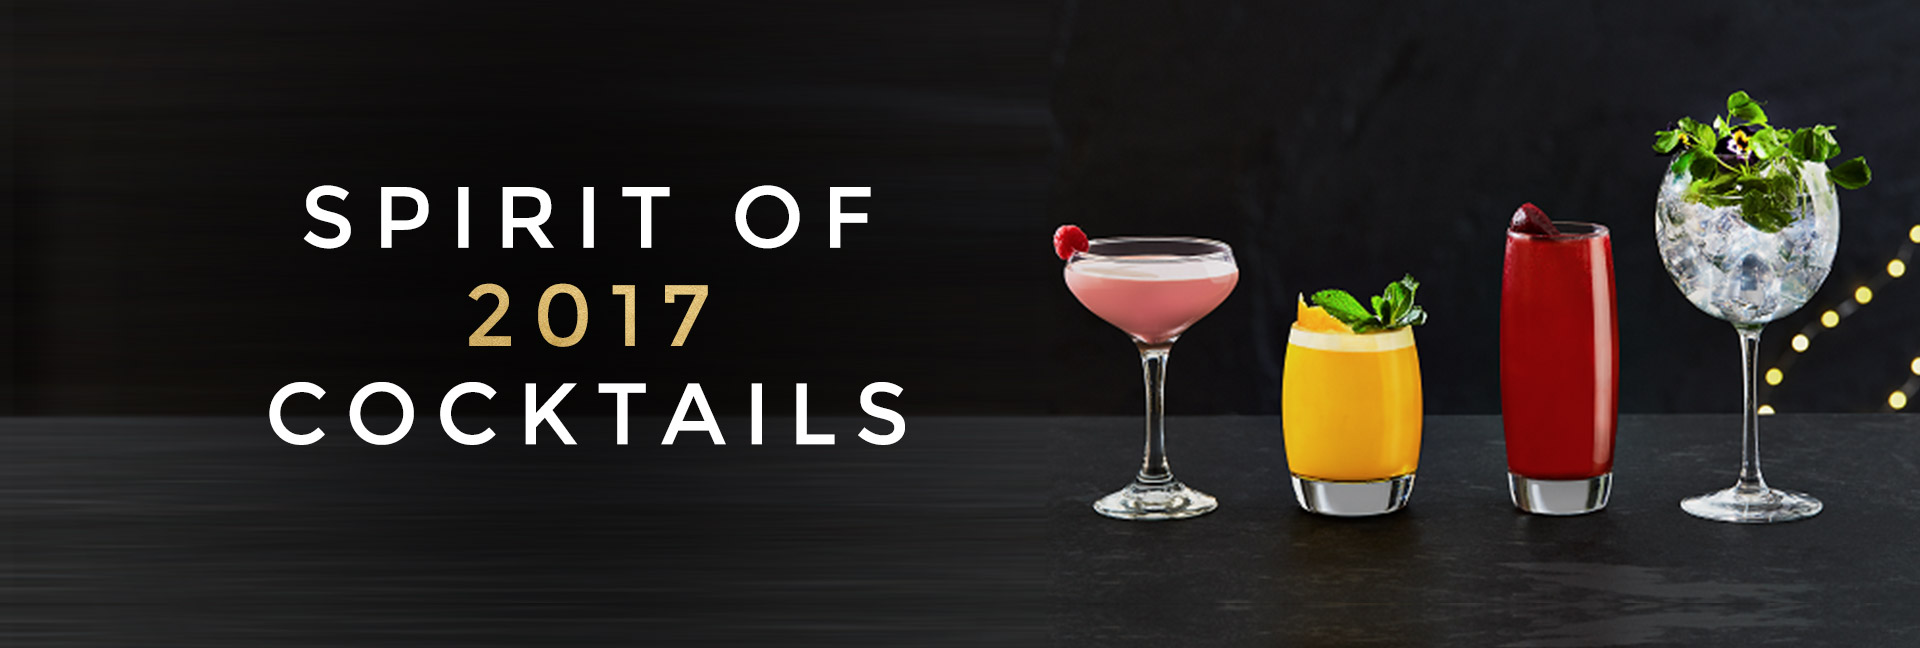 Spirit of 2017 cocktails at All Bar One Liverpool Street